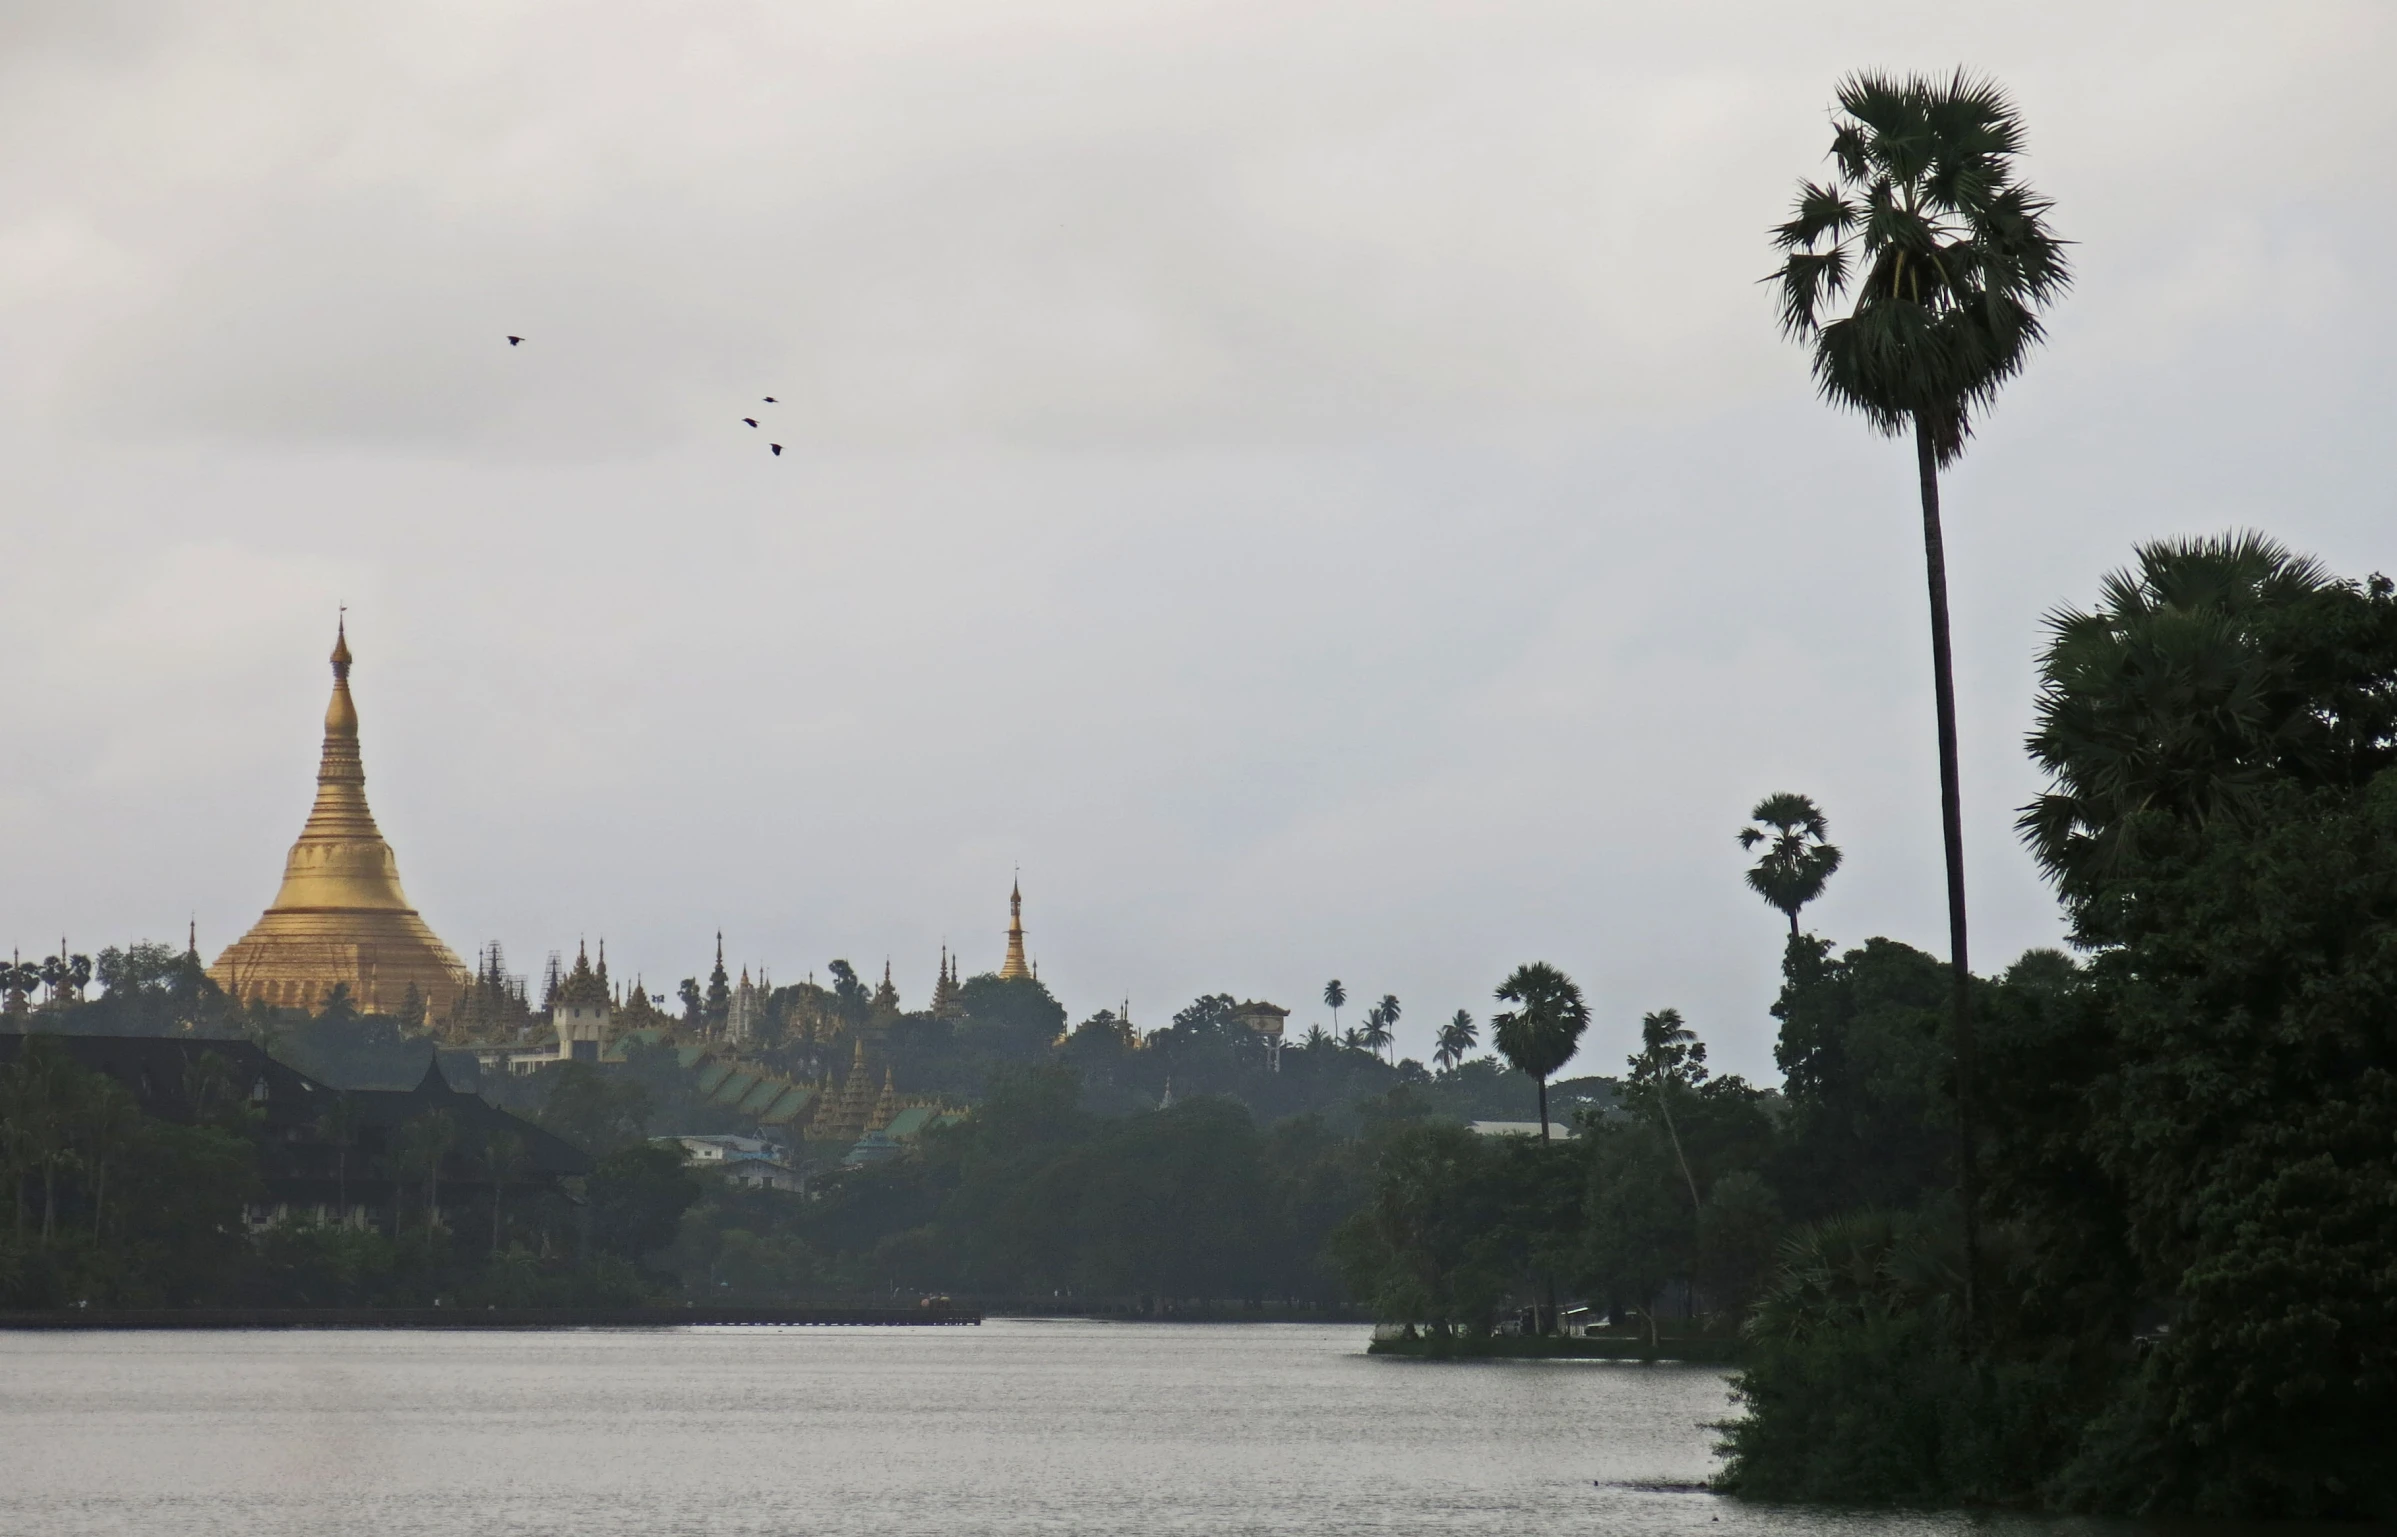 the skyline and gold dome of a church seen through trees